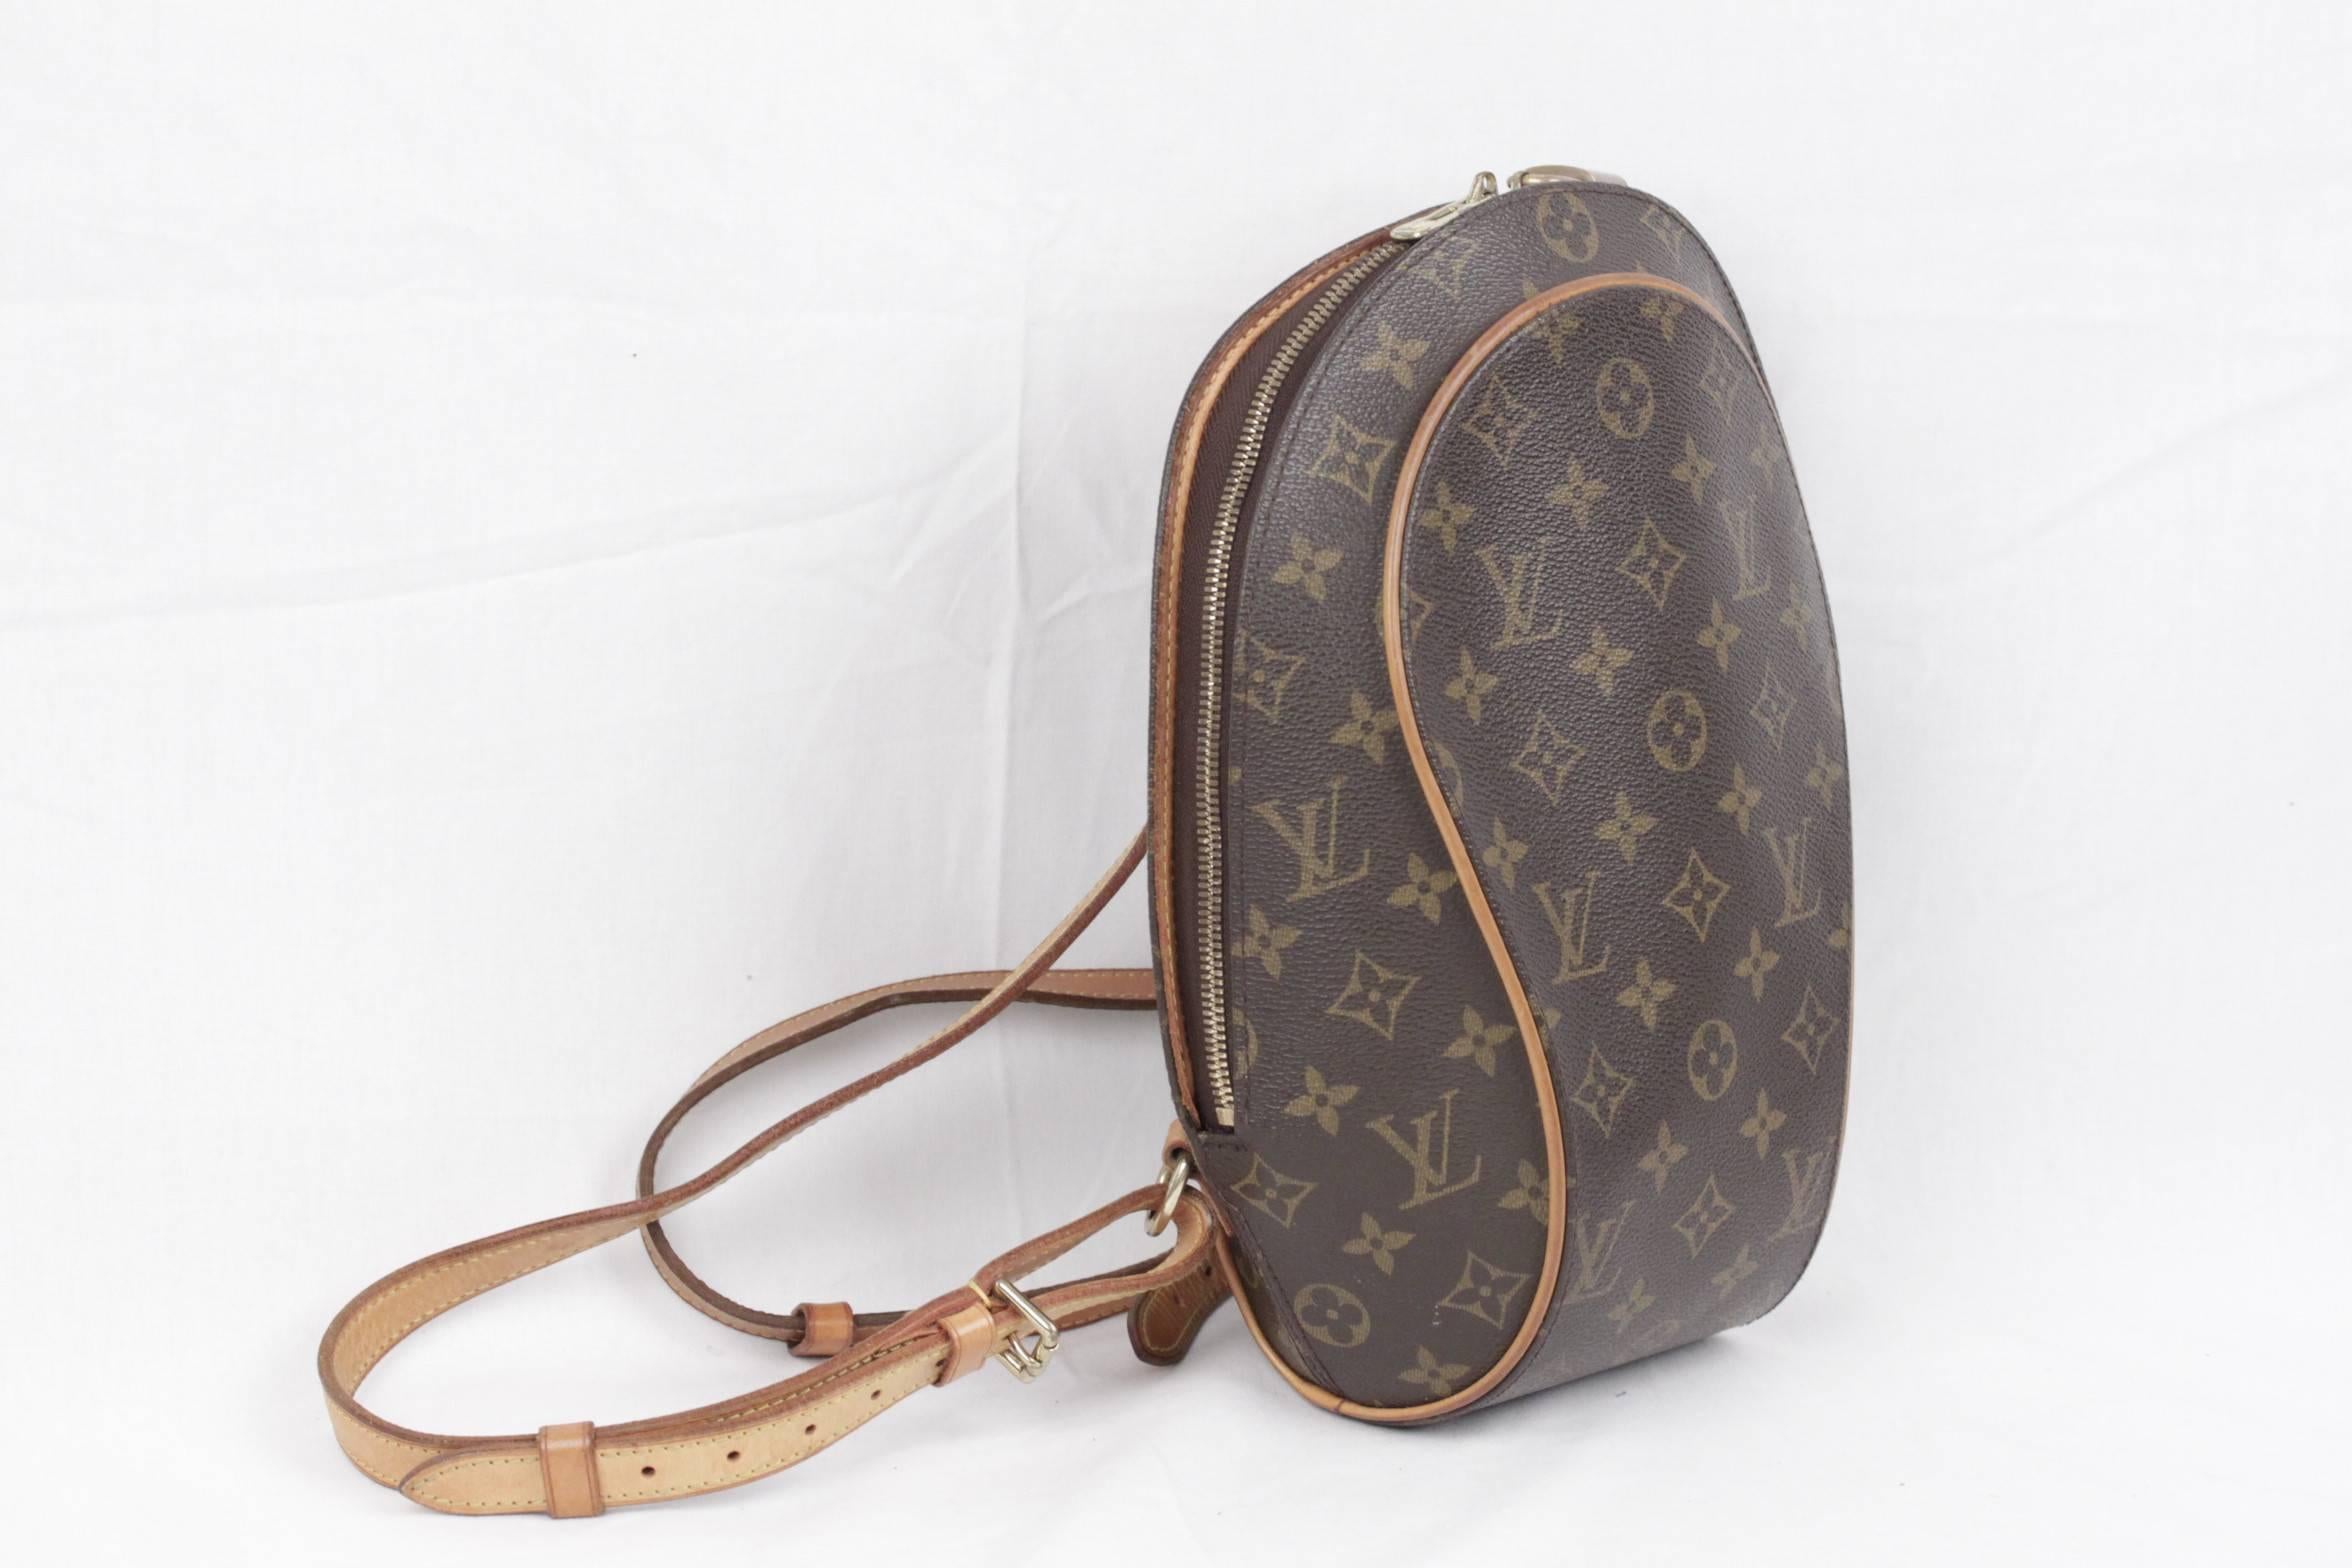  - Sophisticated Louis Vuitton 'ELLIPSE' Backpack bag
- Top is closed with double zipper
- Original Louis vuitton padlock with key included
- Long and adjustable shoulder straps with gold metal hardware
- Brown interior
- 1 open pocket and